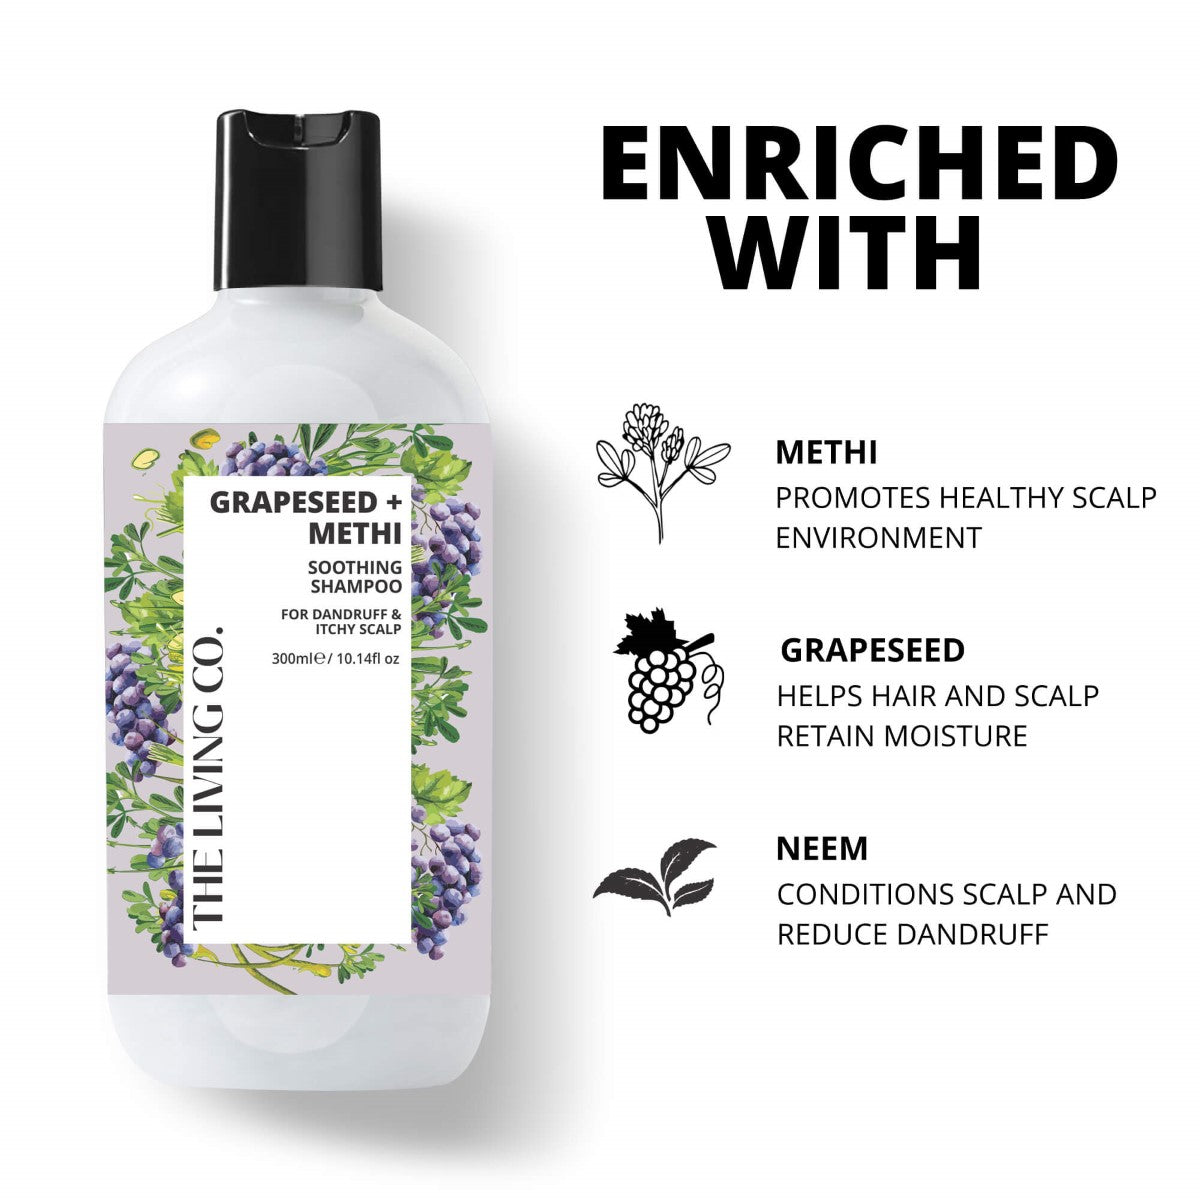 Soothing Shampoo With Grapeseed + Methi